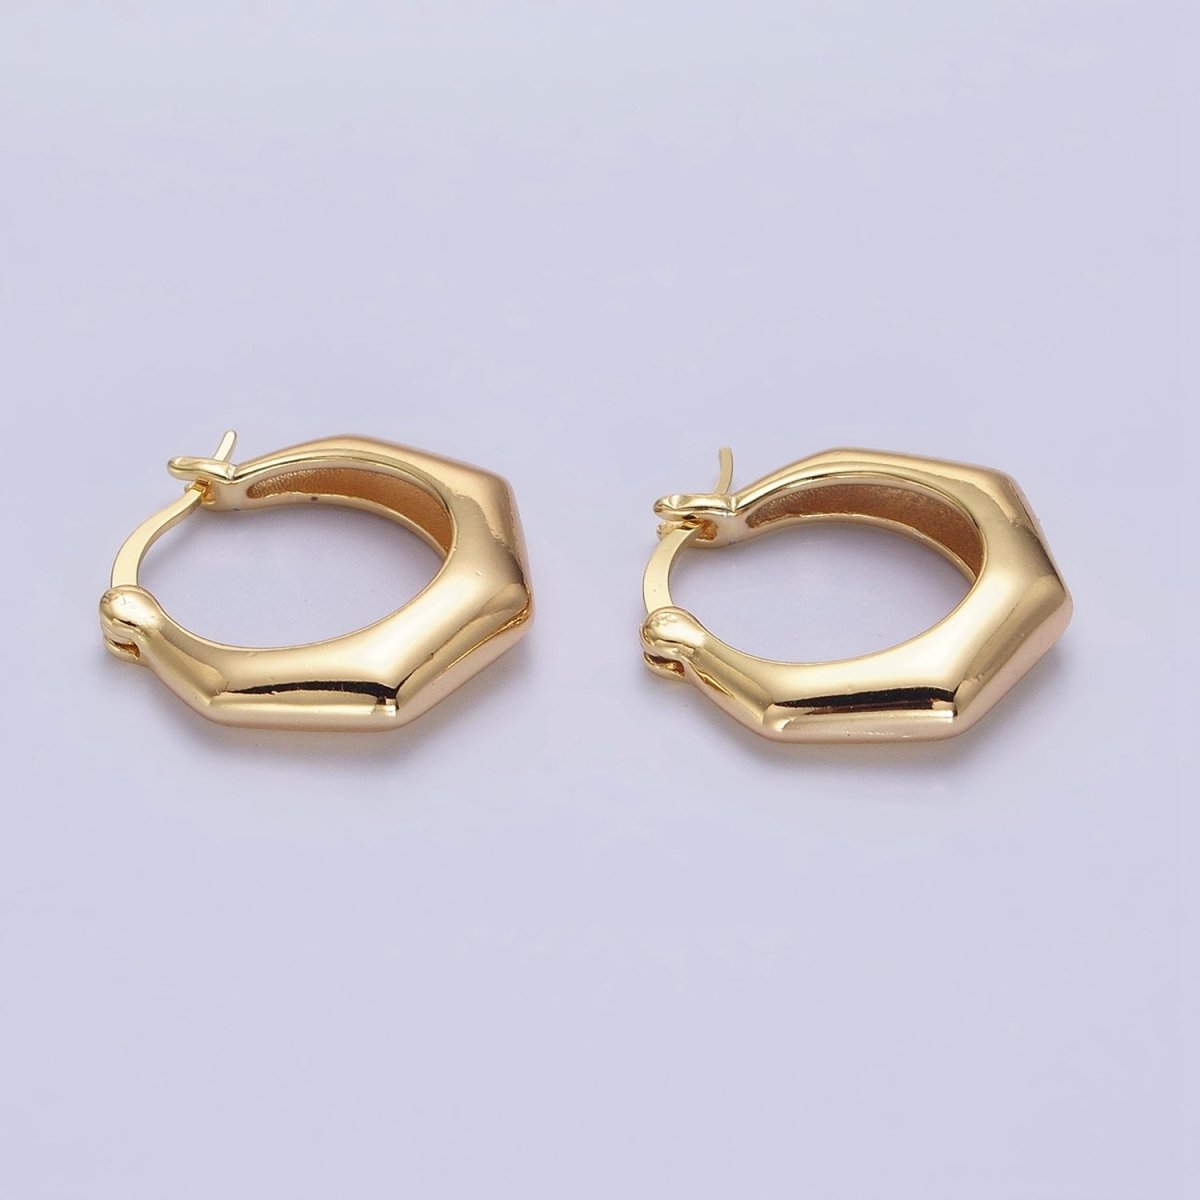 16K Gold Filled 20mm Hexagonal Dome French Lock Latch Earrings in Gold & Silver | AB1472 AB1473 - DLUXCA